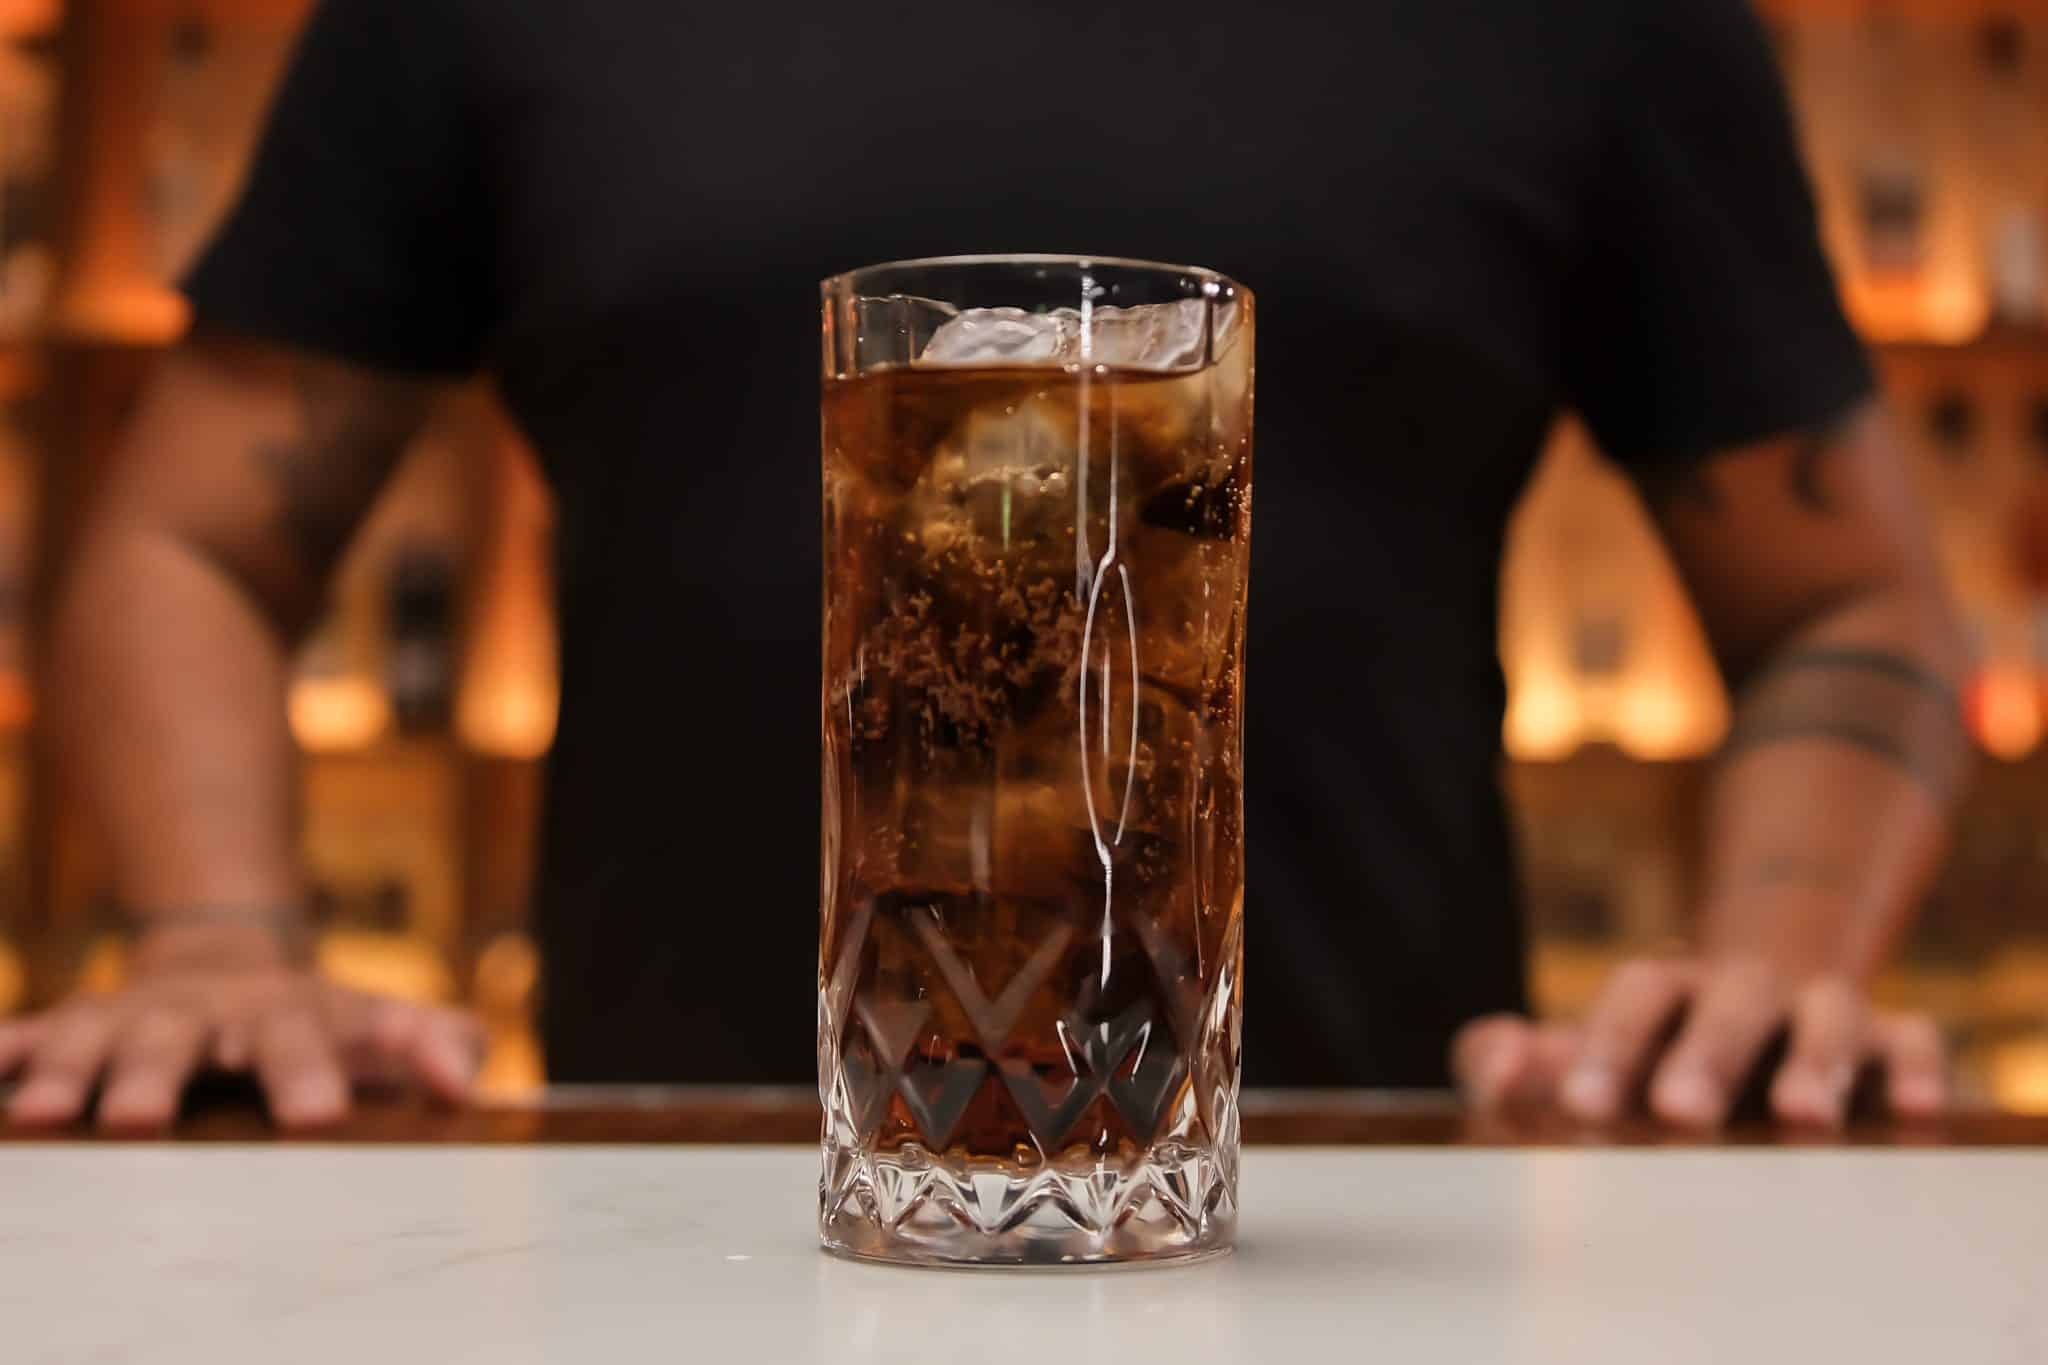 <p>Optionally, squeeze a lime wedge over the top and drop it into the glass for a citrusy touch.<br />
Enjoy your Rum and Coke!</p>
